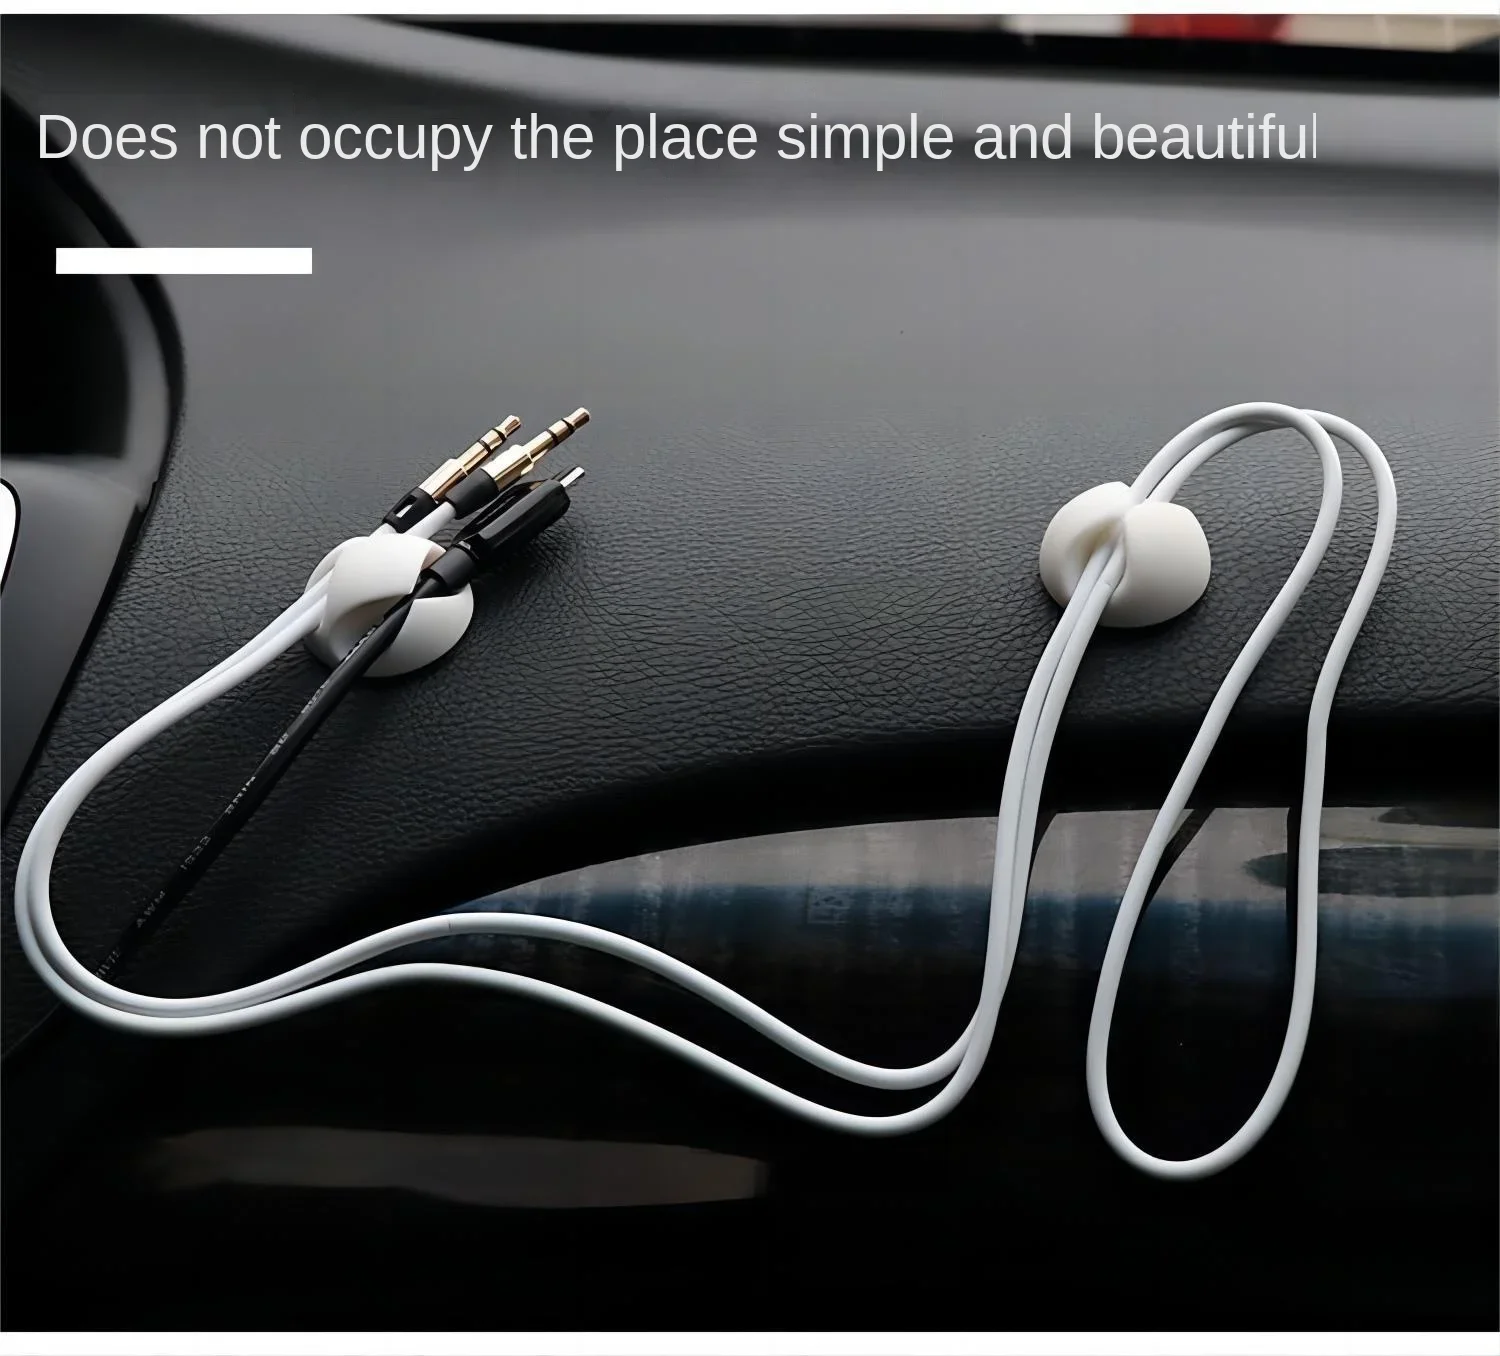 6PCS Car USB Cable Organizer Fixer Self-Adhesive Cable Bracket Cable Clamp Silicone Cable Tie Fixer Car Storage Clip Accessories